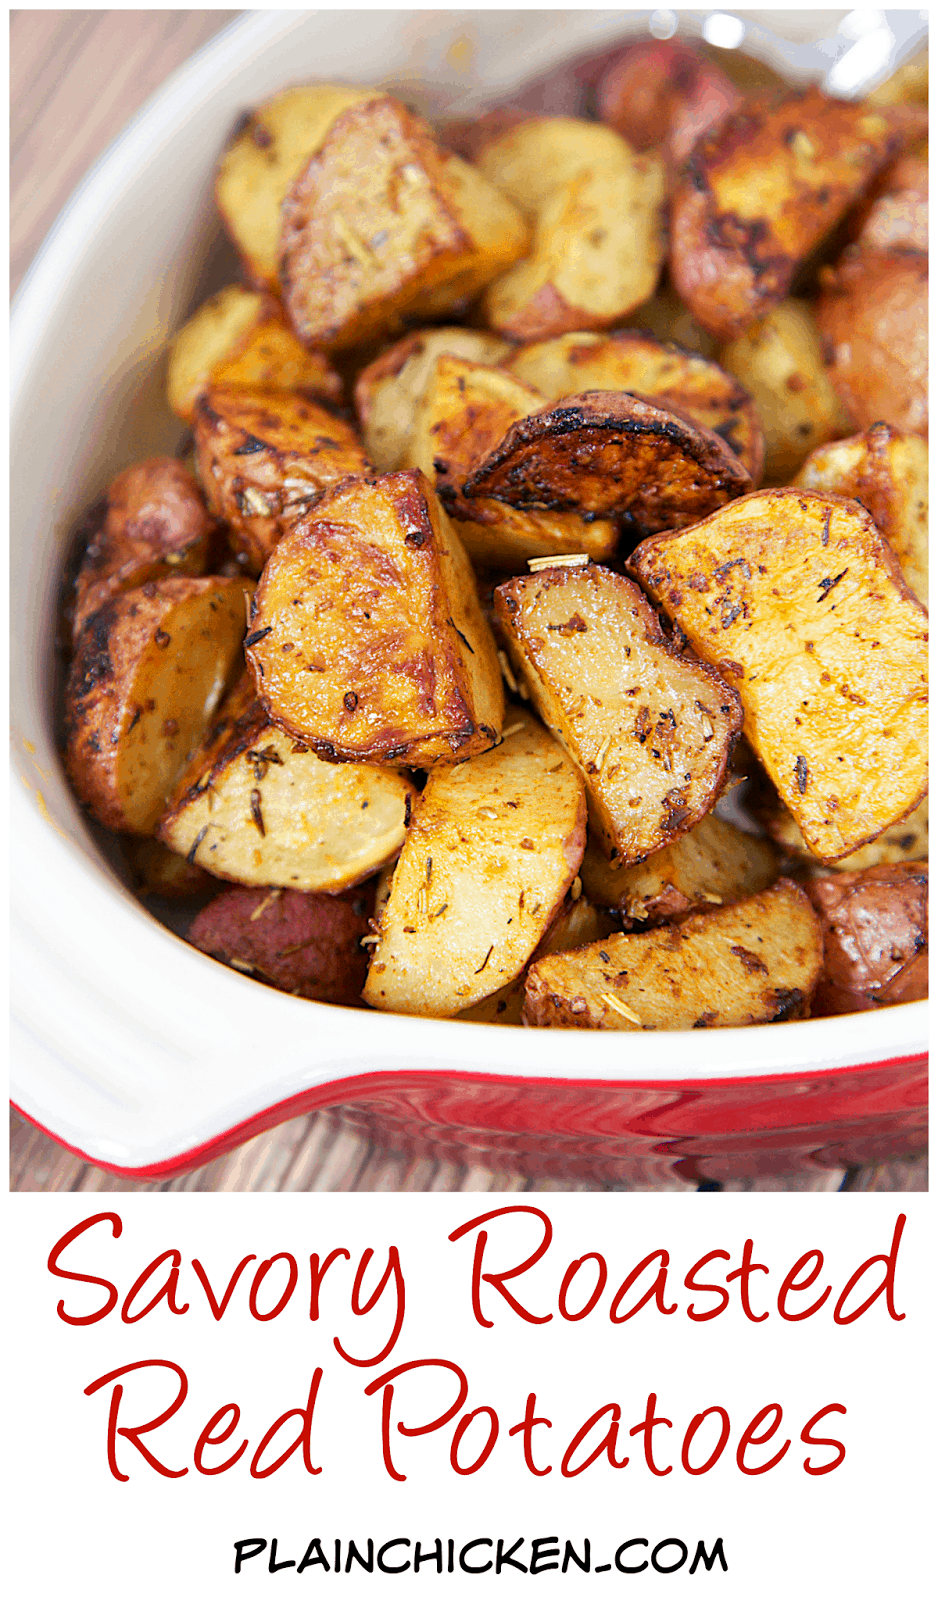 Savory Roasted Red Potatoes Recipe - red potatoes tossed in oil, rosemary, Worcestershire, garlic, paprika and baked. Seriously delicious. Great with chicken, beef and pork. We like them with a juicy burger instead of fries. We make these potatoes at least once a week!